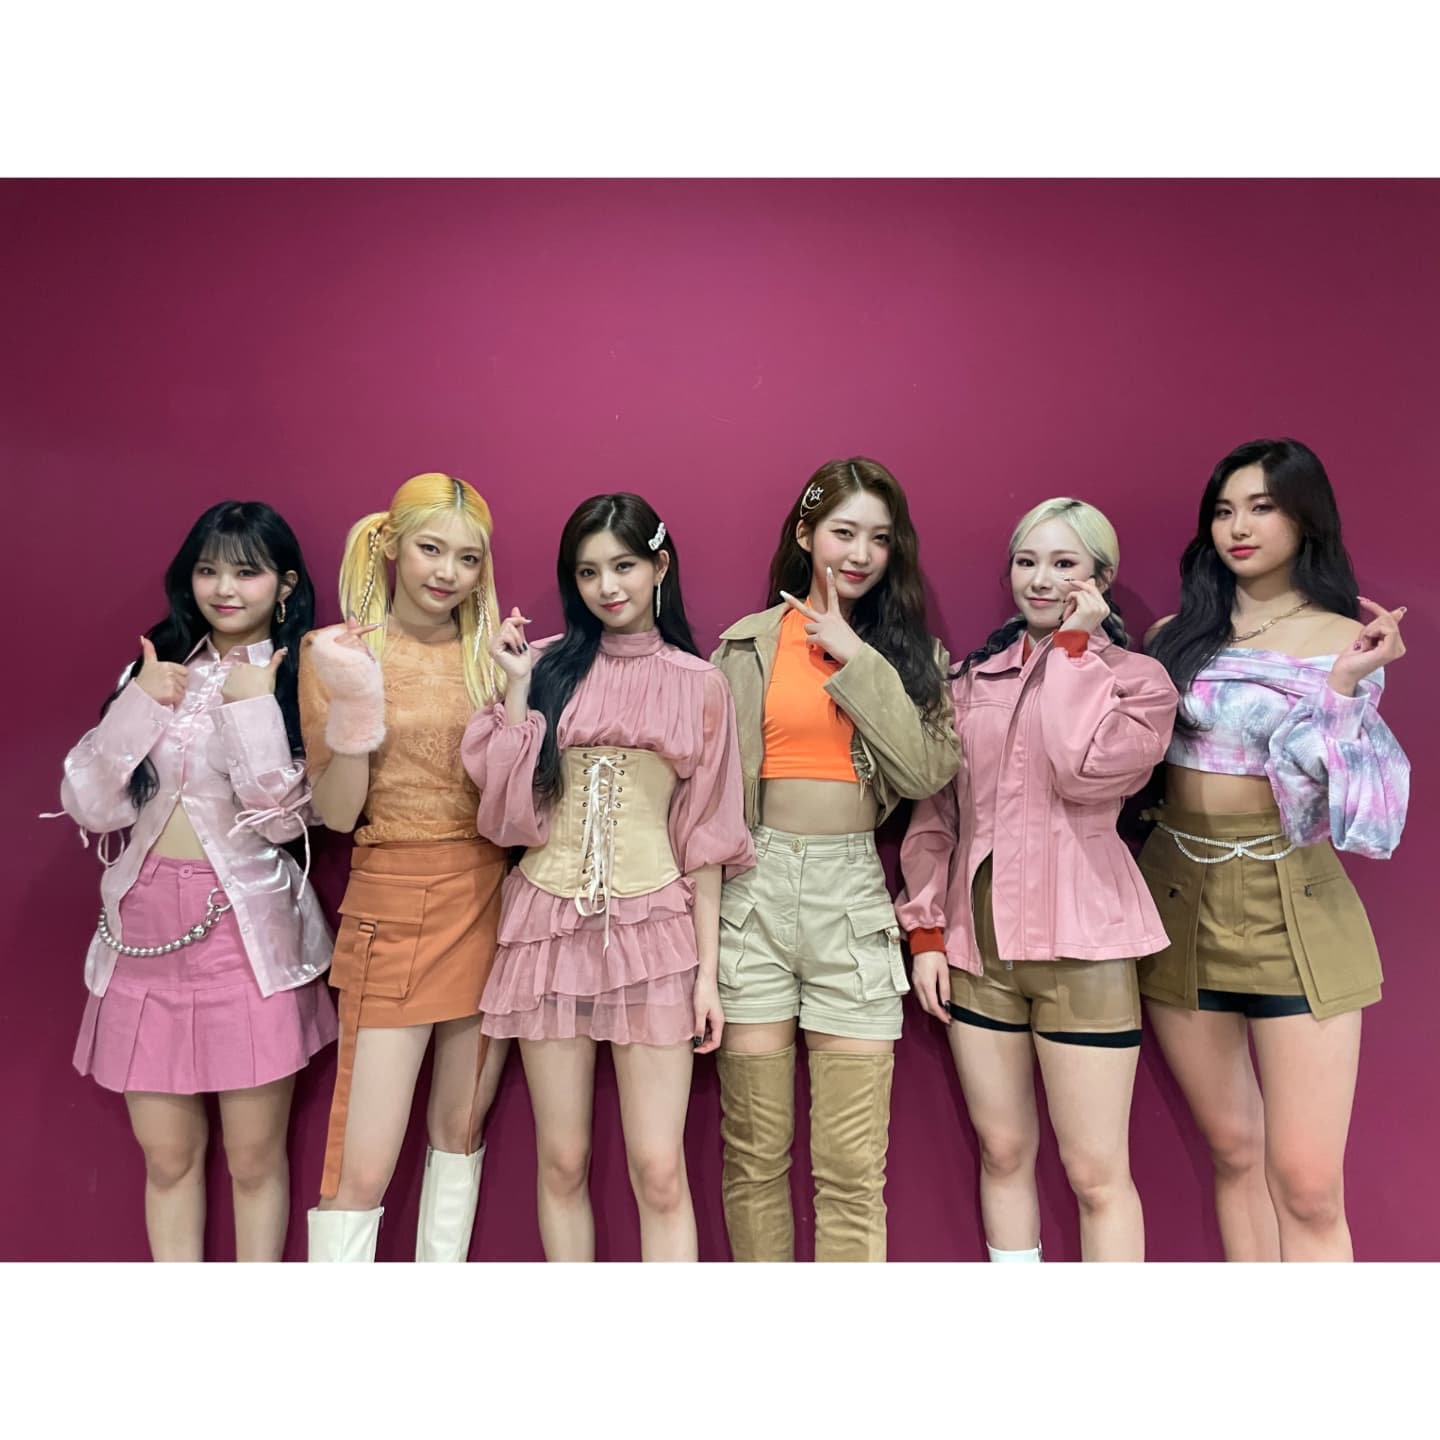 EVERGLOW Attends Japan's Large Outdoor Music Festival